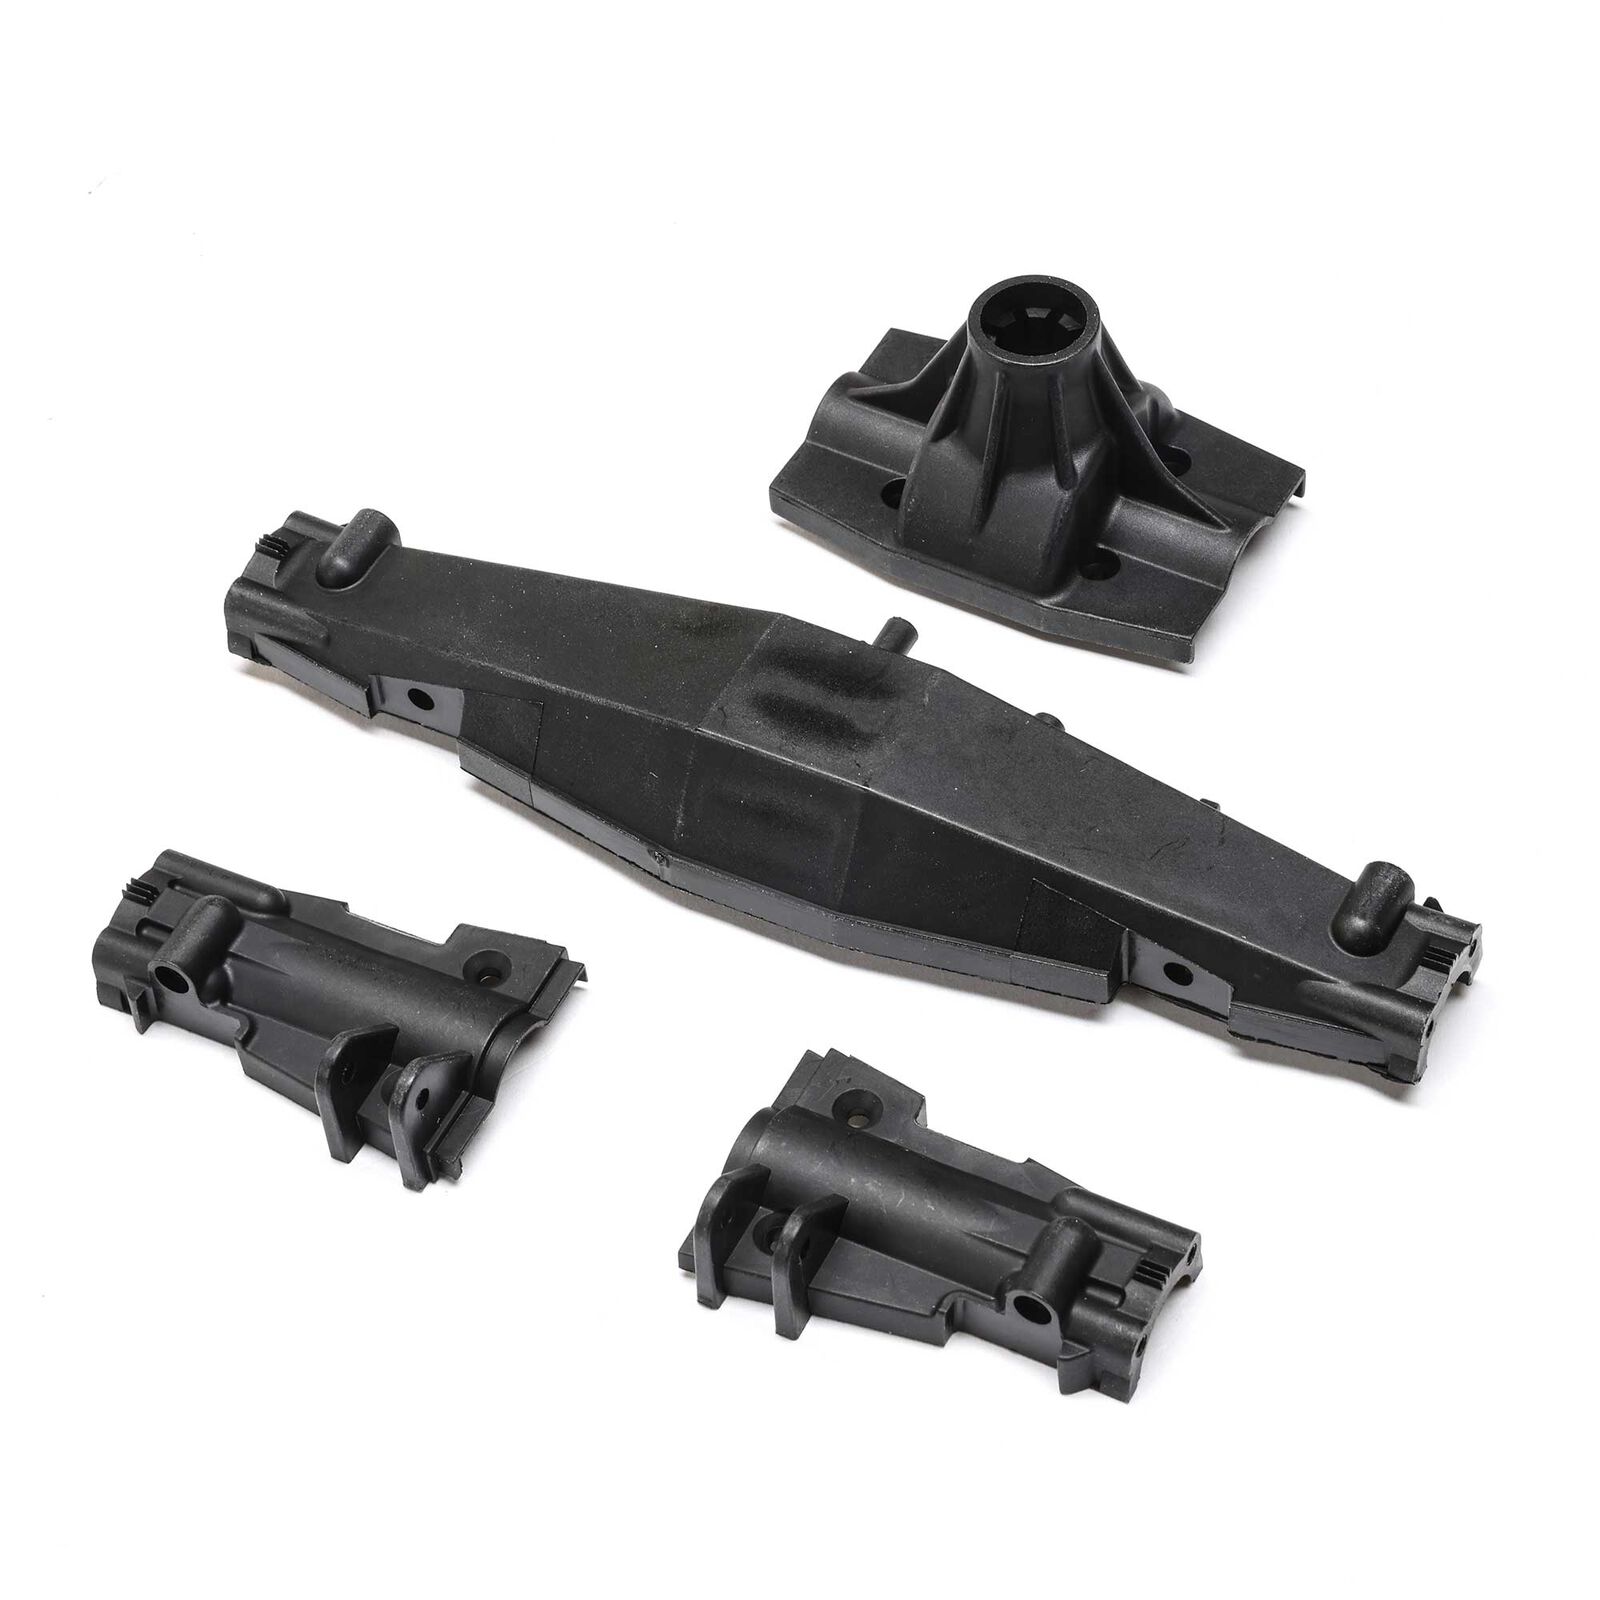 Axle Housing Set, Center: TLR Tuned LMT